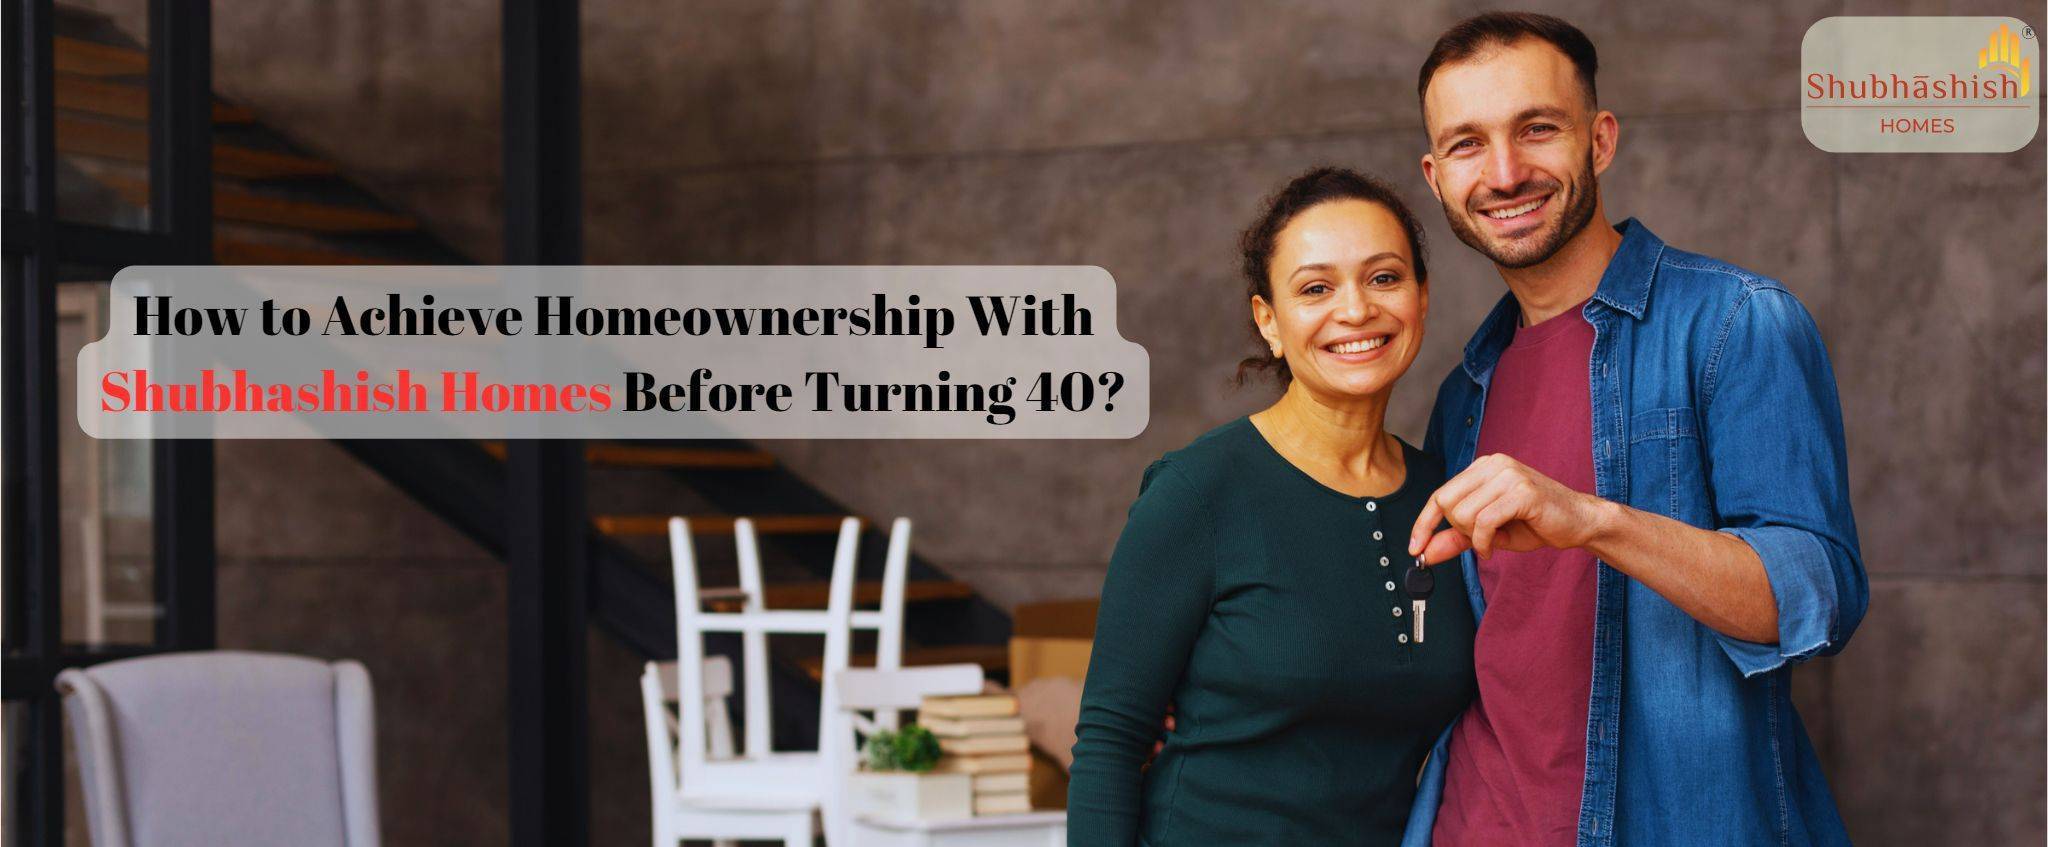 How to Achieve Homeownership Before Turning 40?